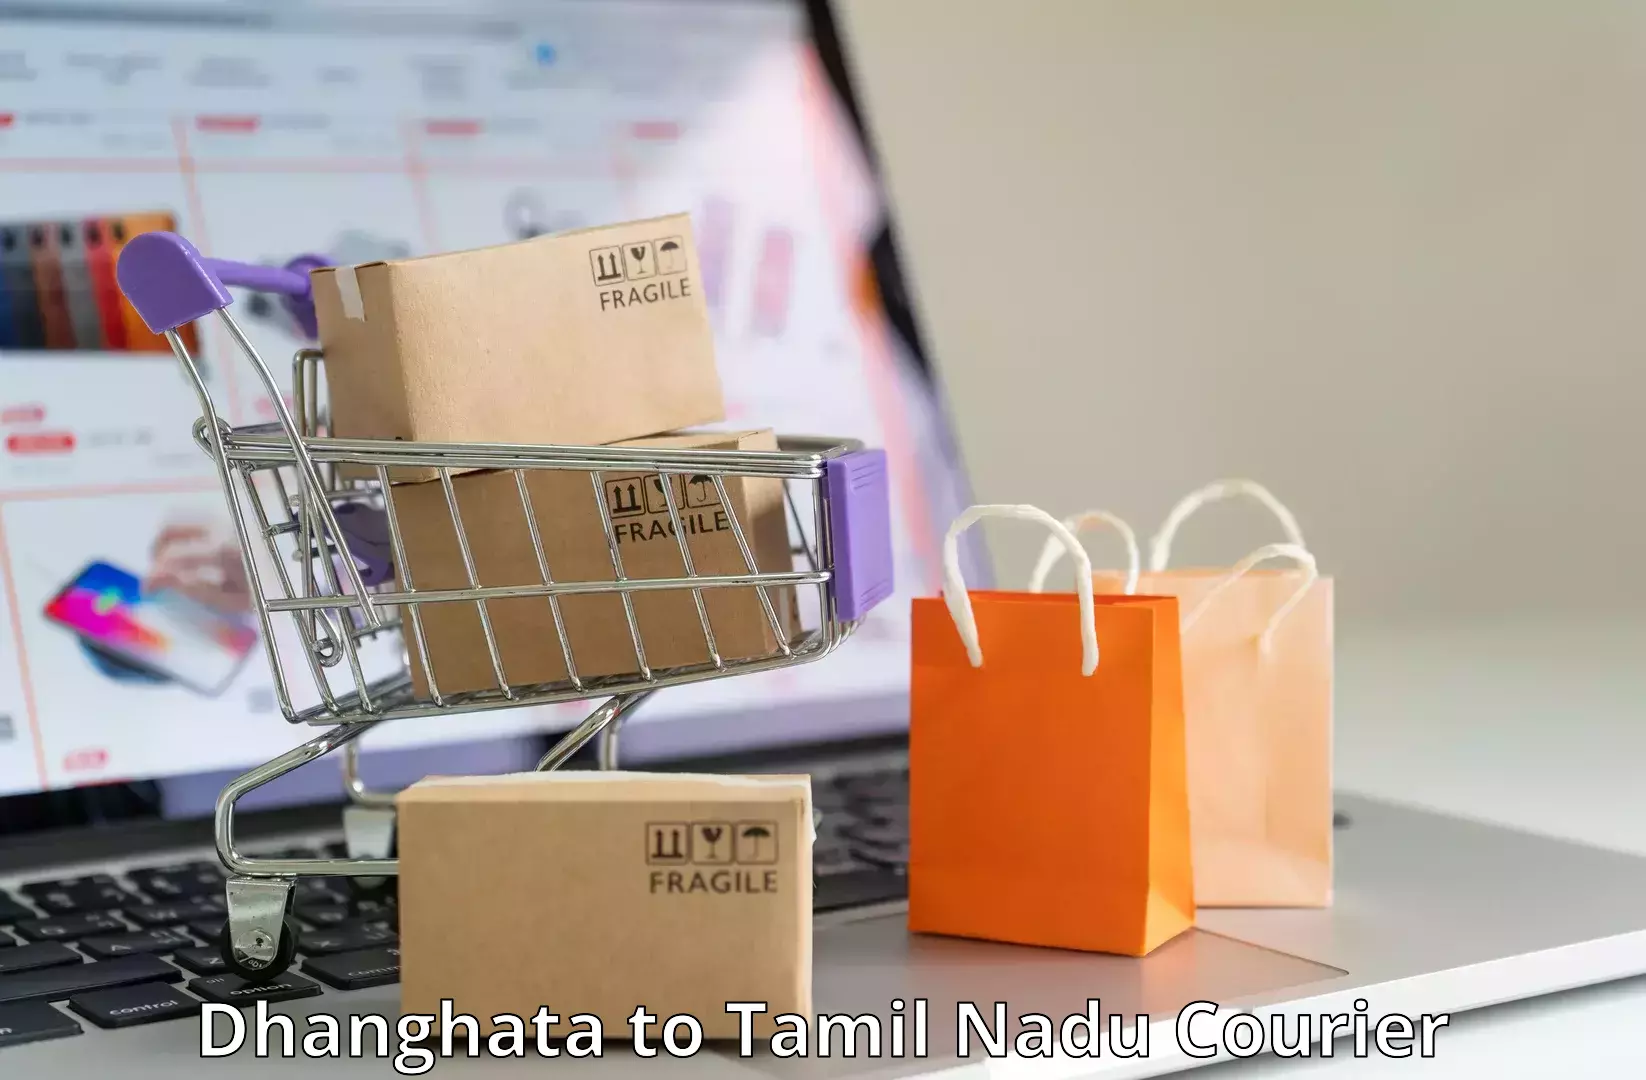 24-hour courier service Dhanghata to Tamil Nadu